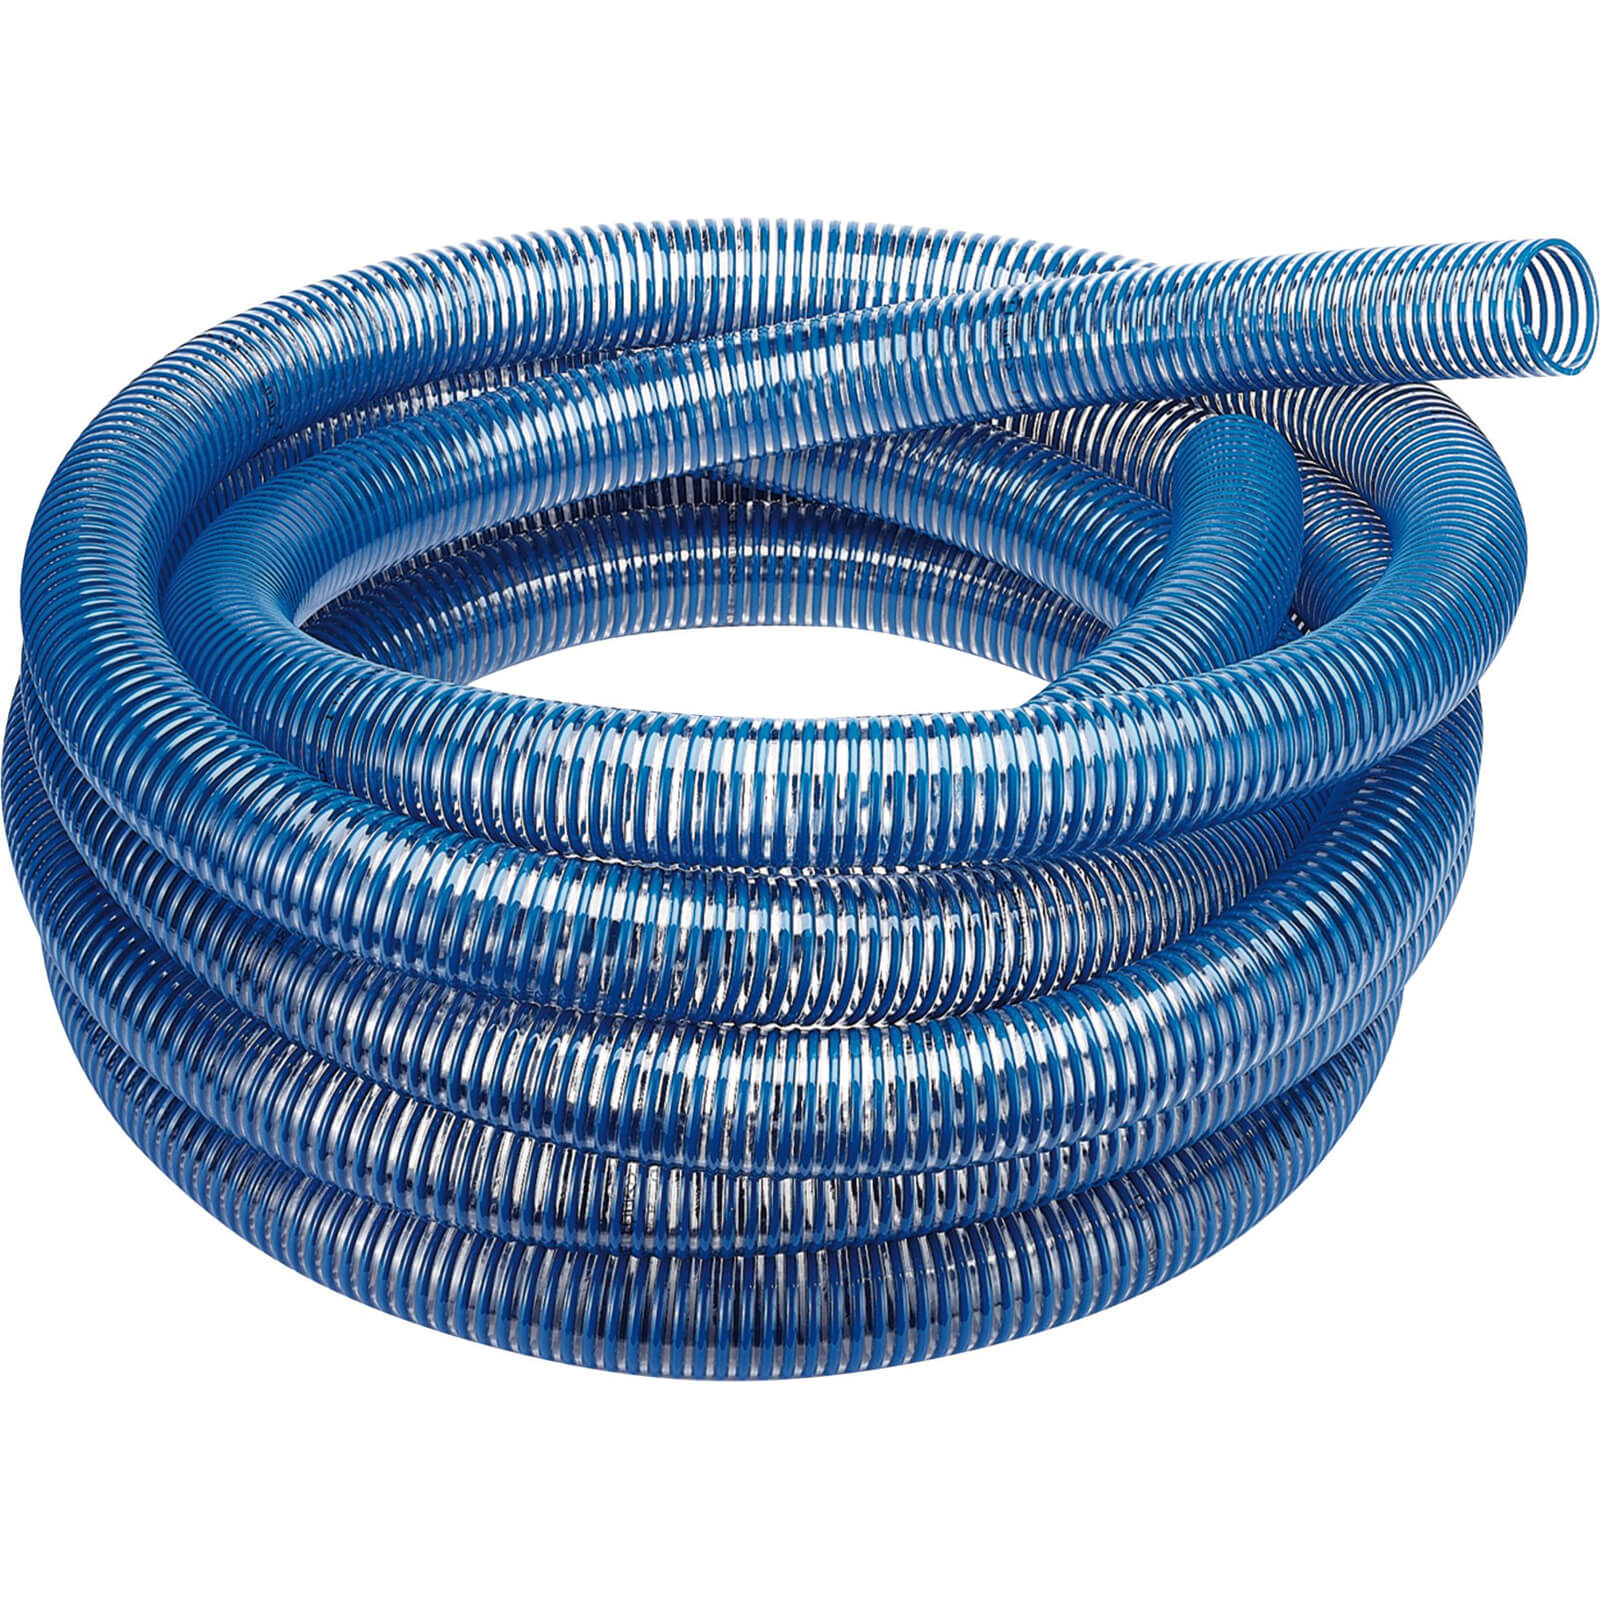 Image of Draper Solid Wall PVC Suction Hose 75mm 10m